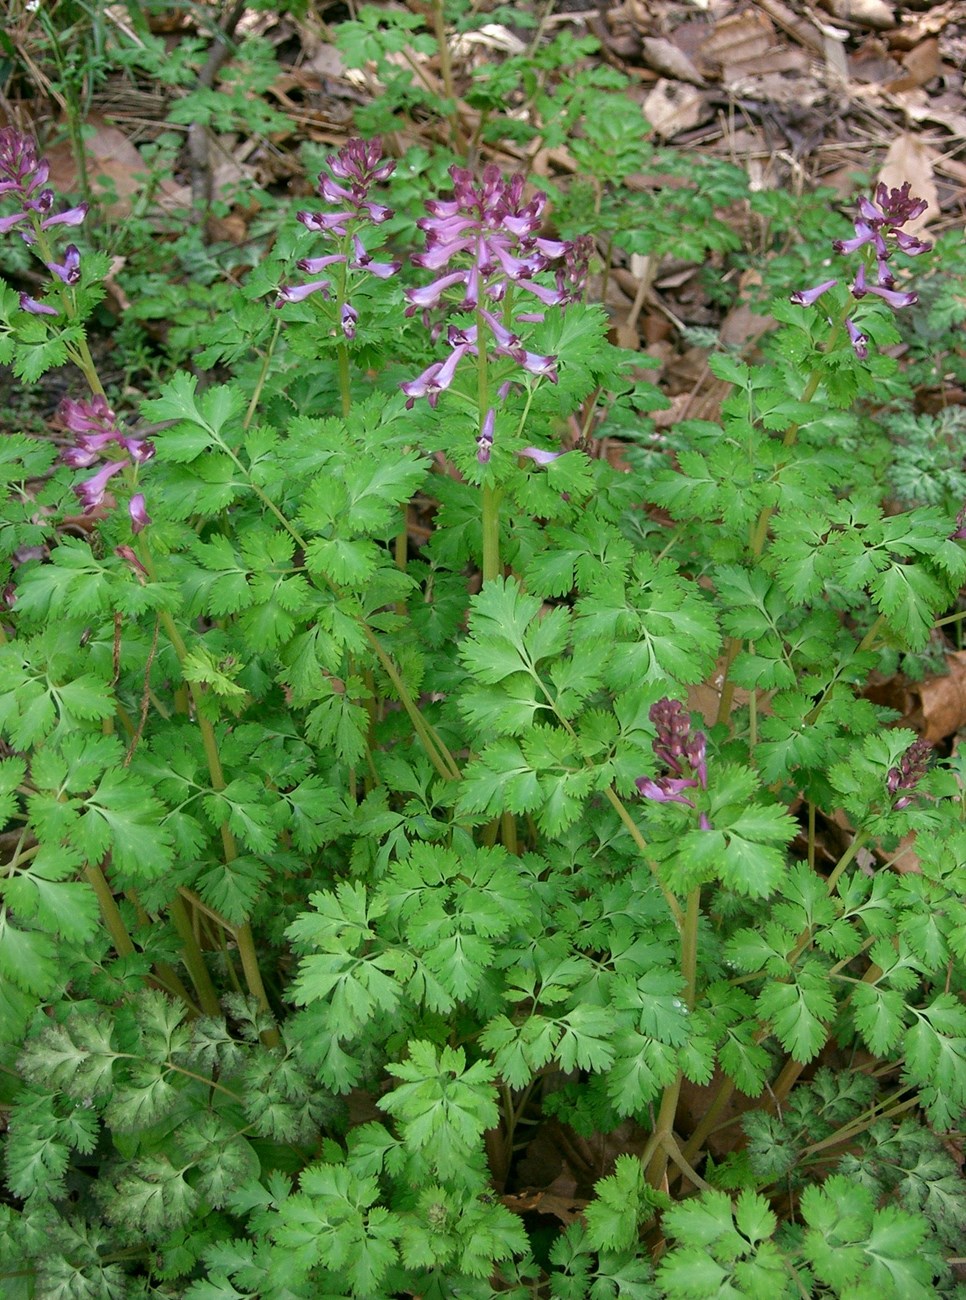 A low growing plant with incised green leaves and stalks of purple flowers